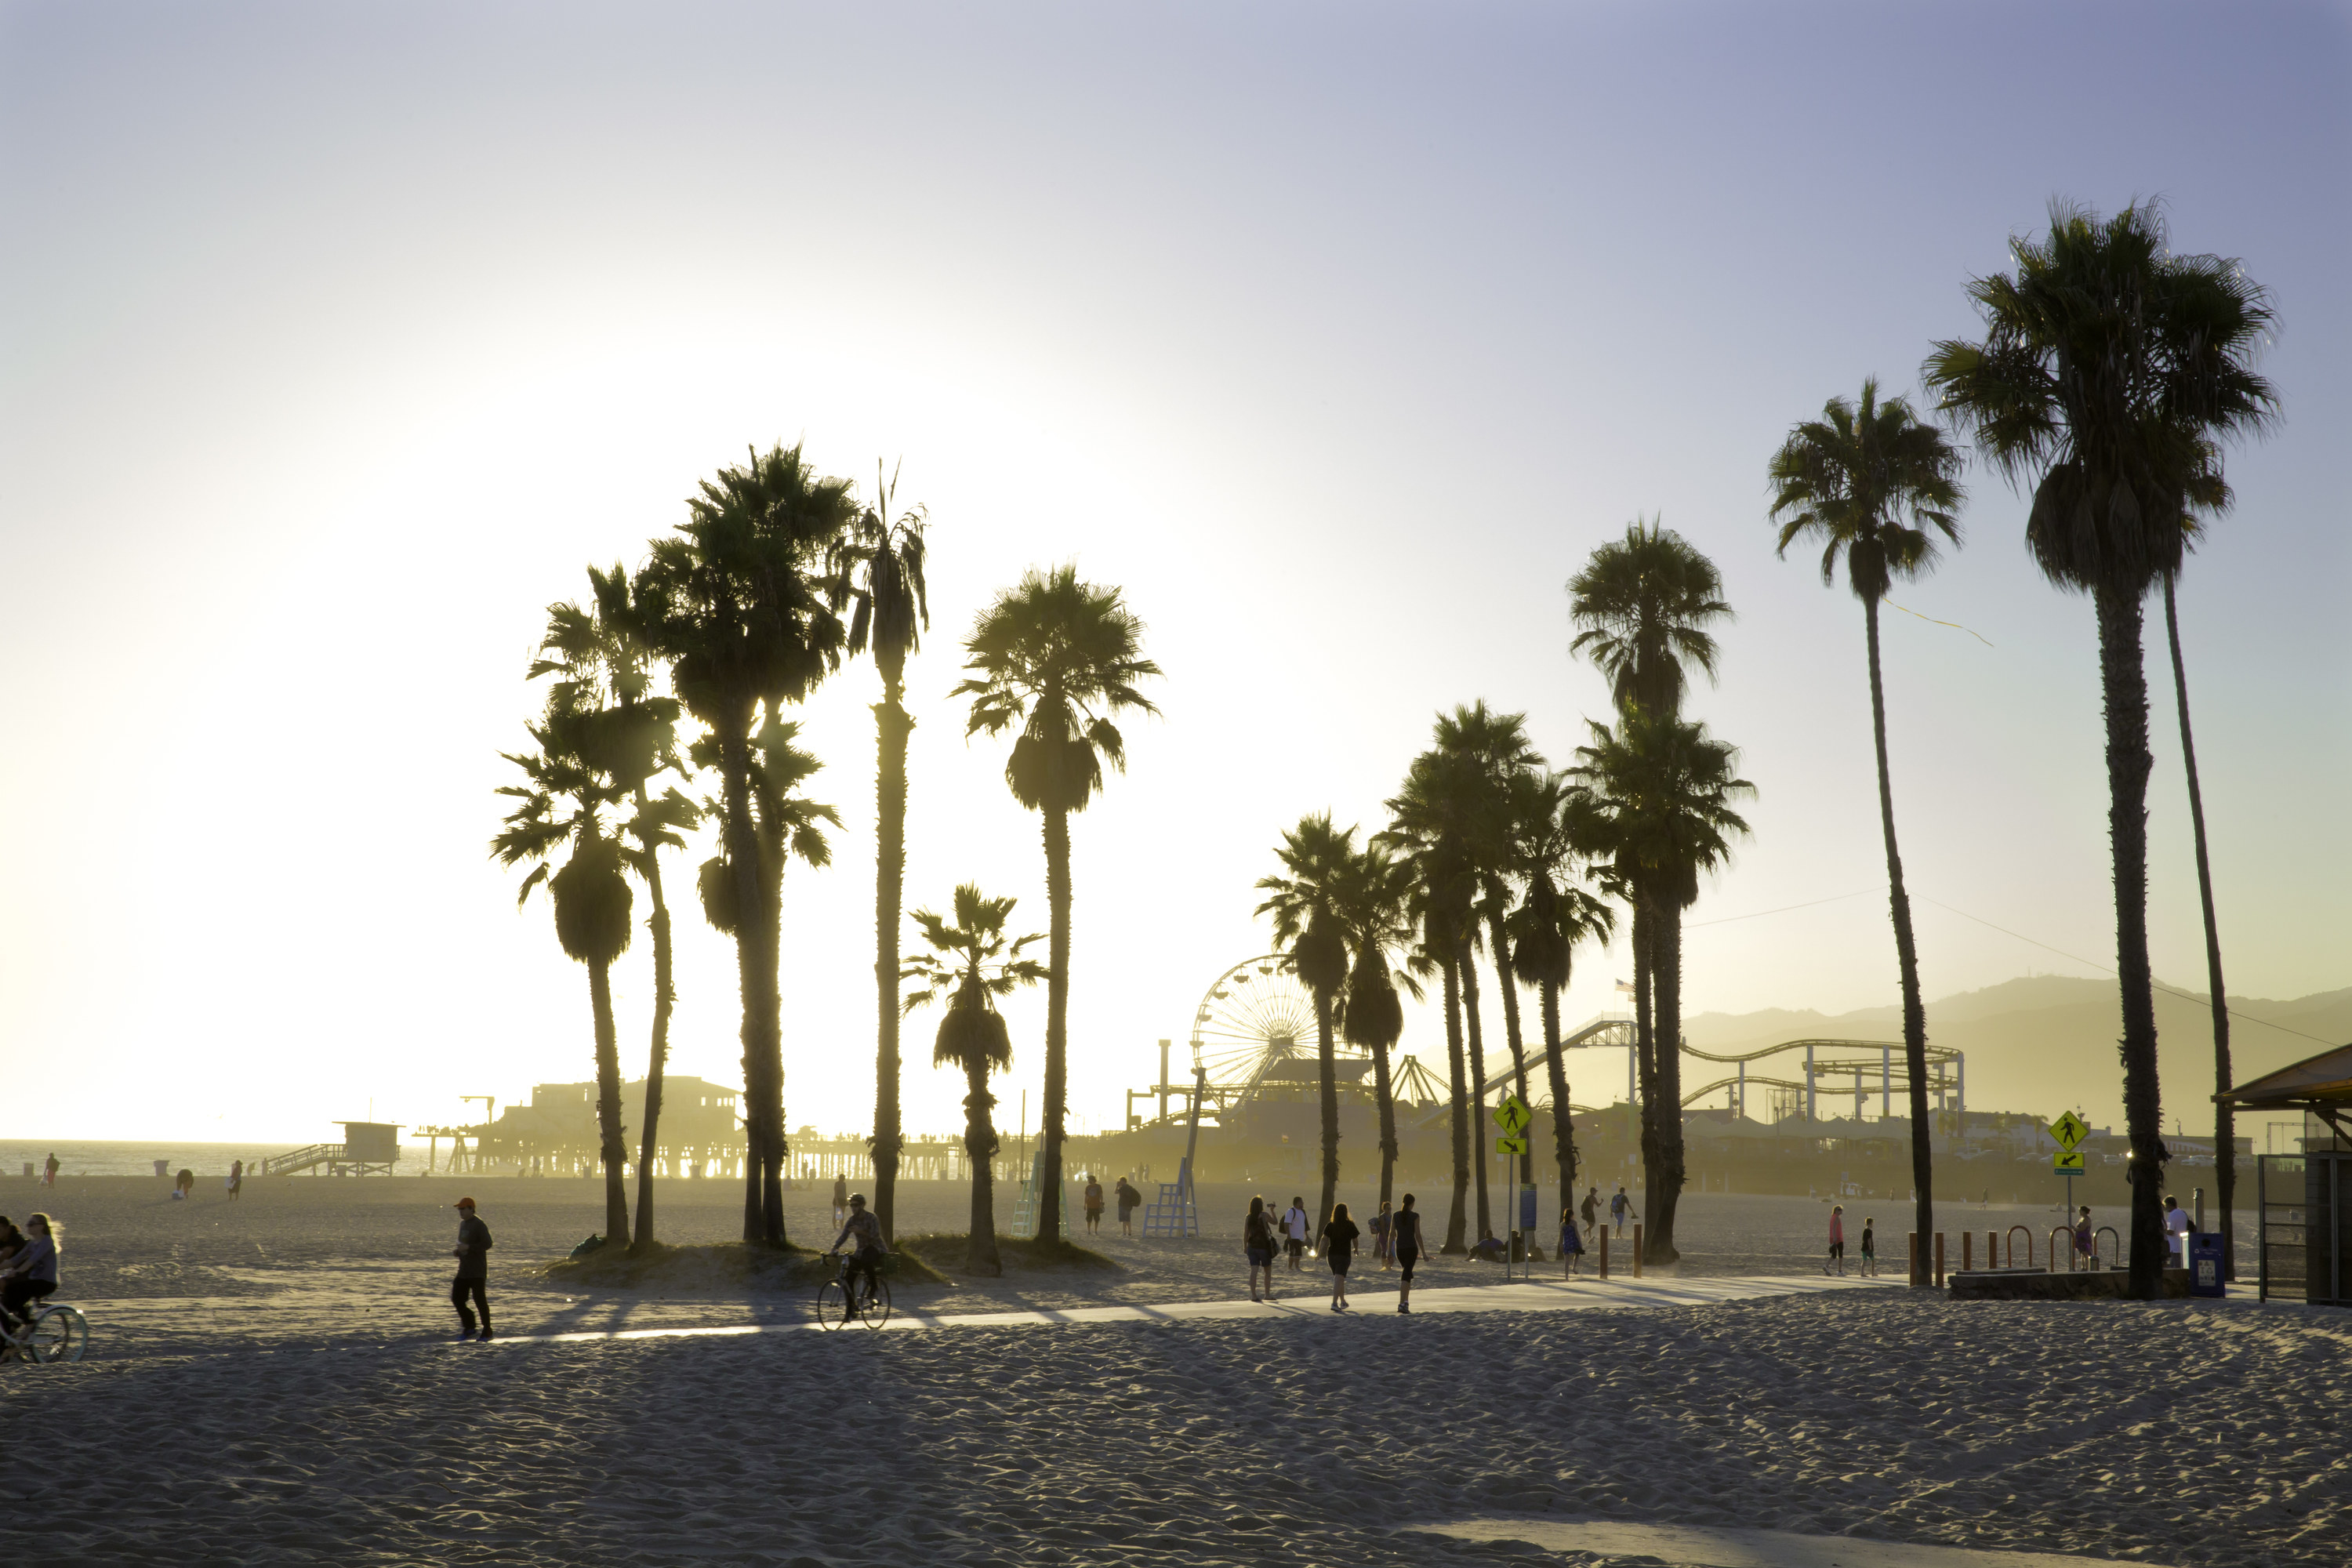 West Coast beach with palm trees silhouettes